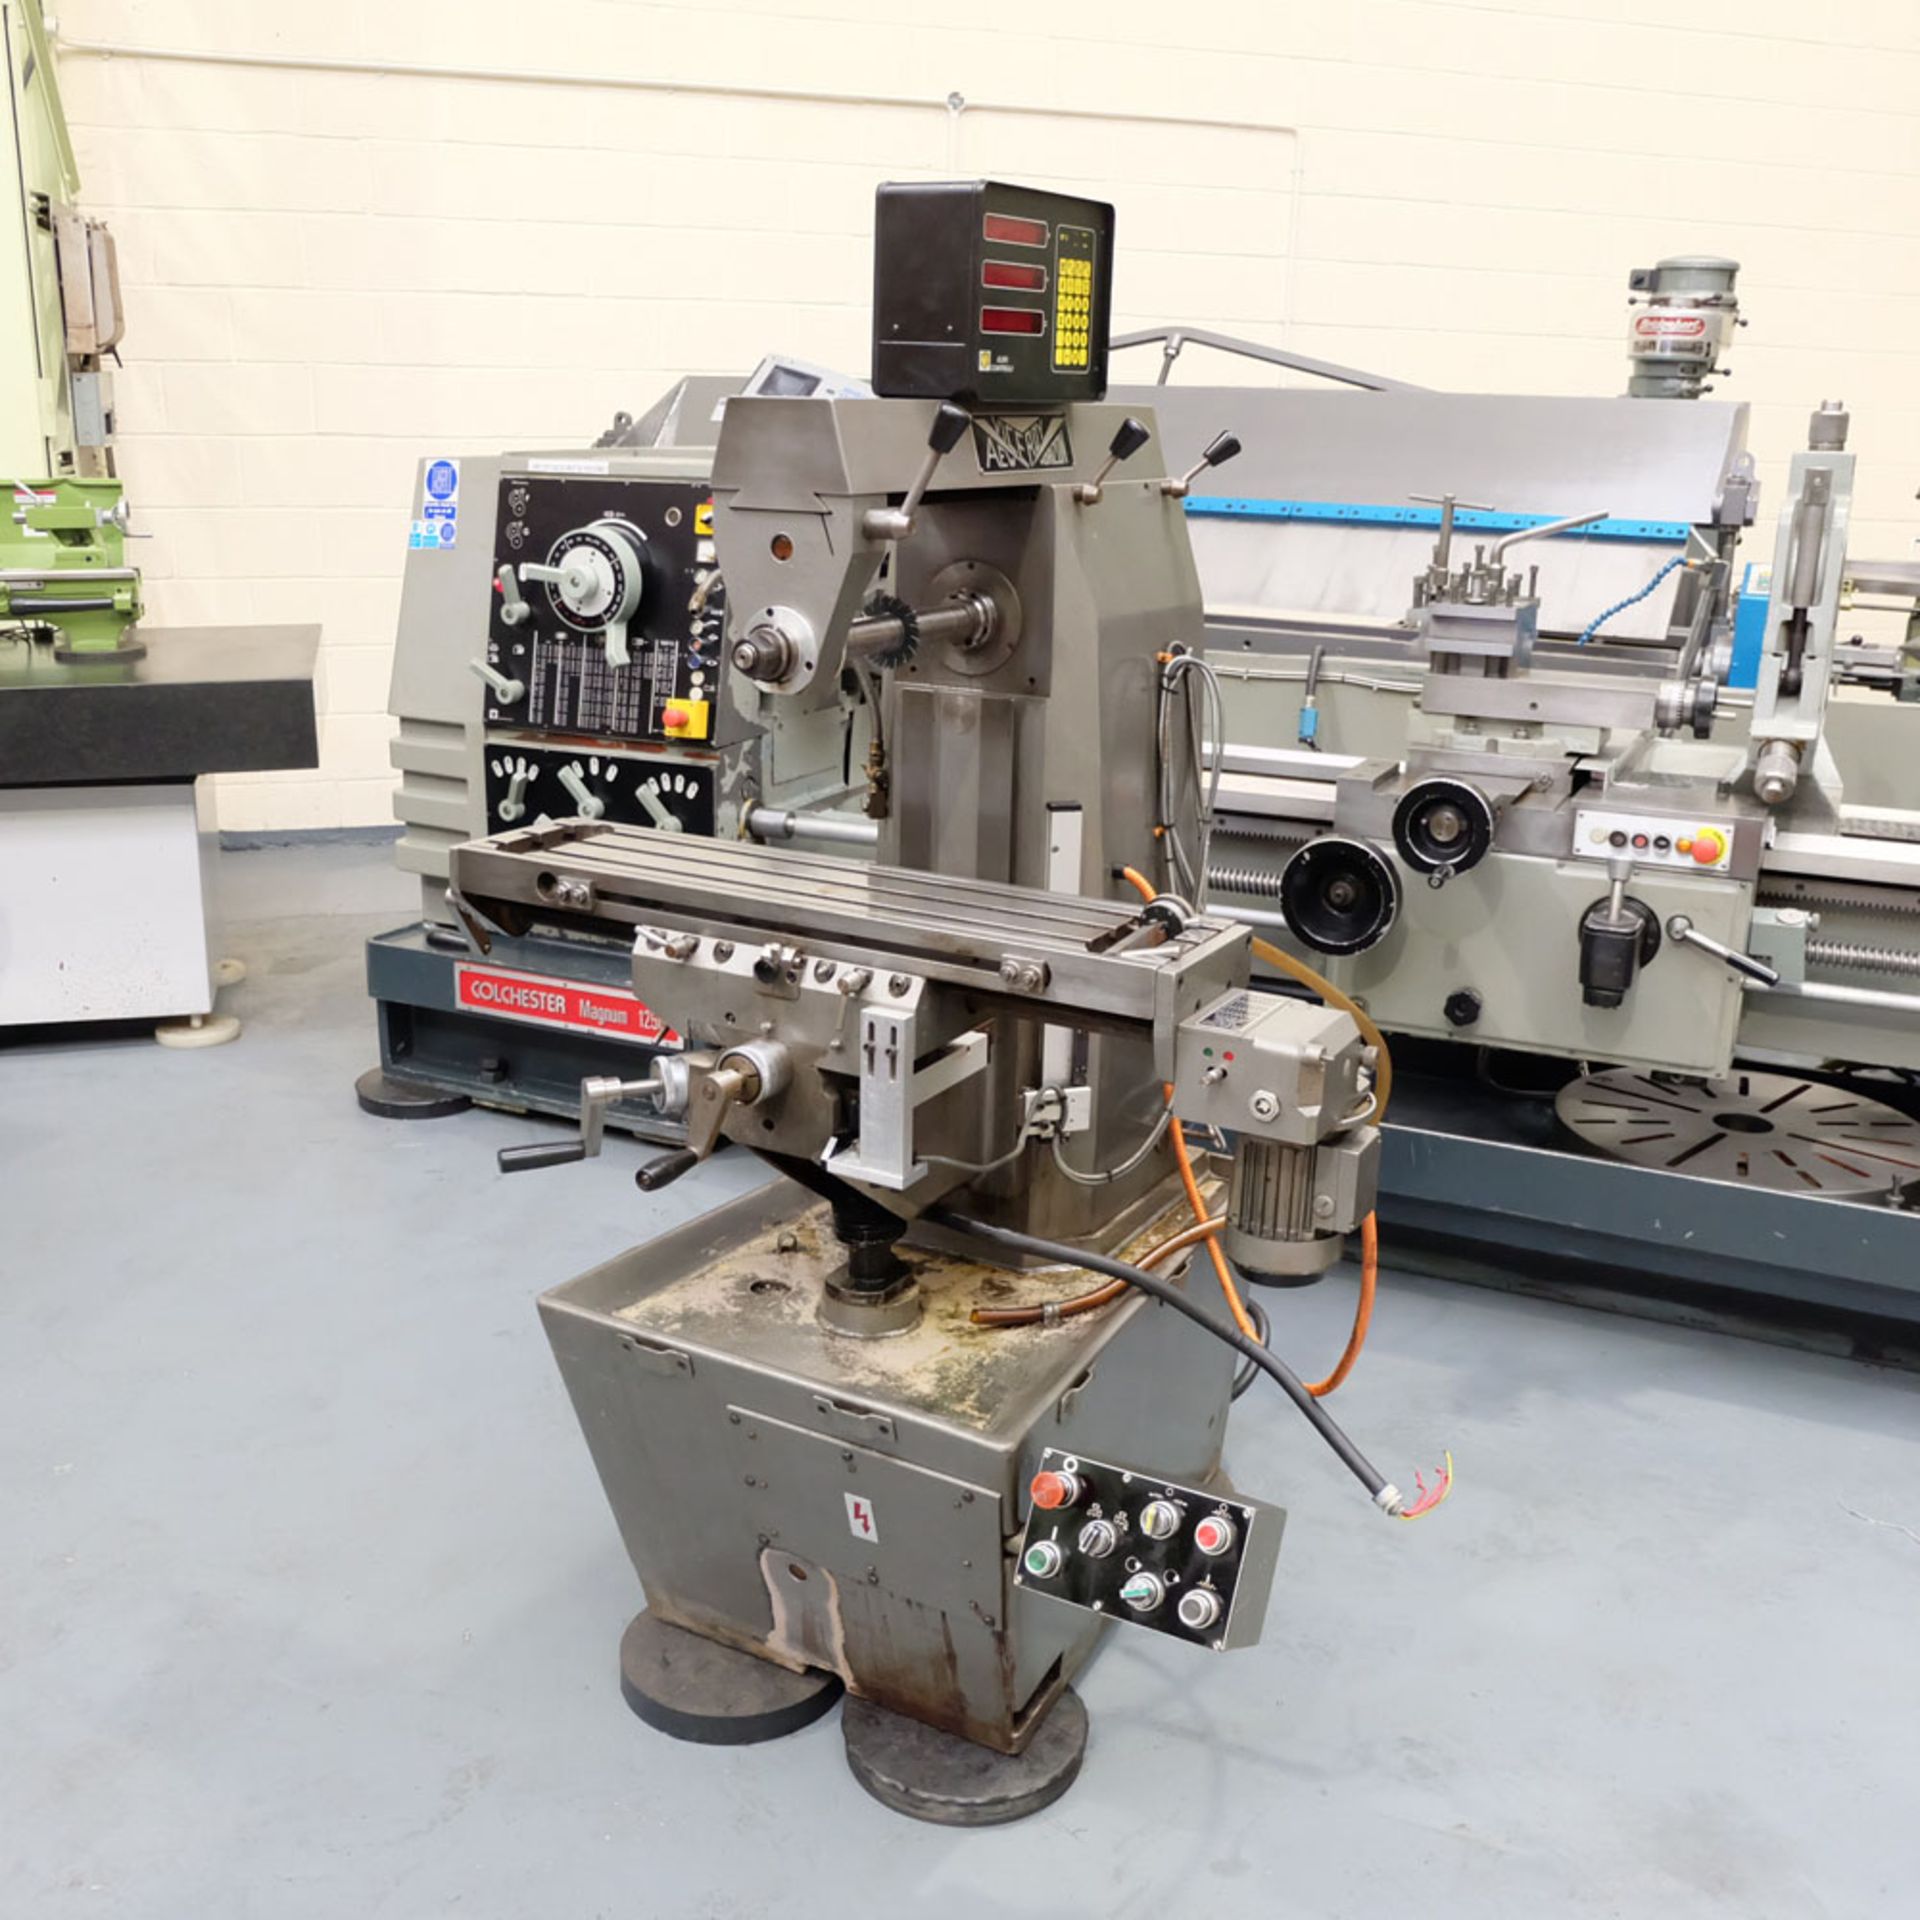 Viceroy Type AEW Horizontal Milling Machine. Table Size 35" x 8". Power Feed in X Axis.